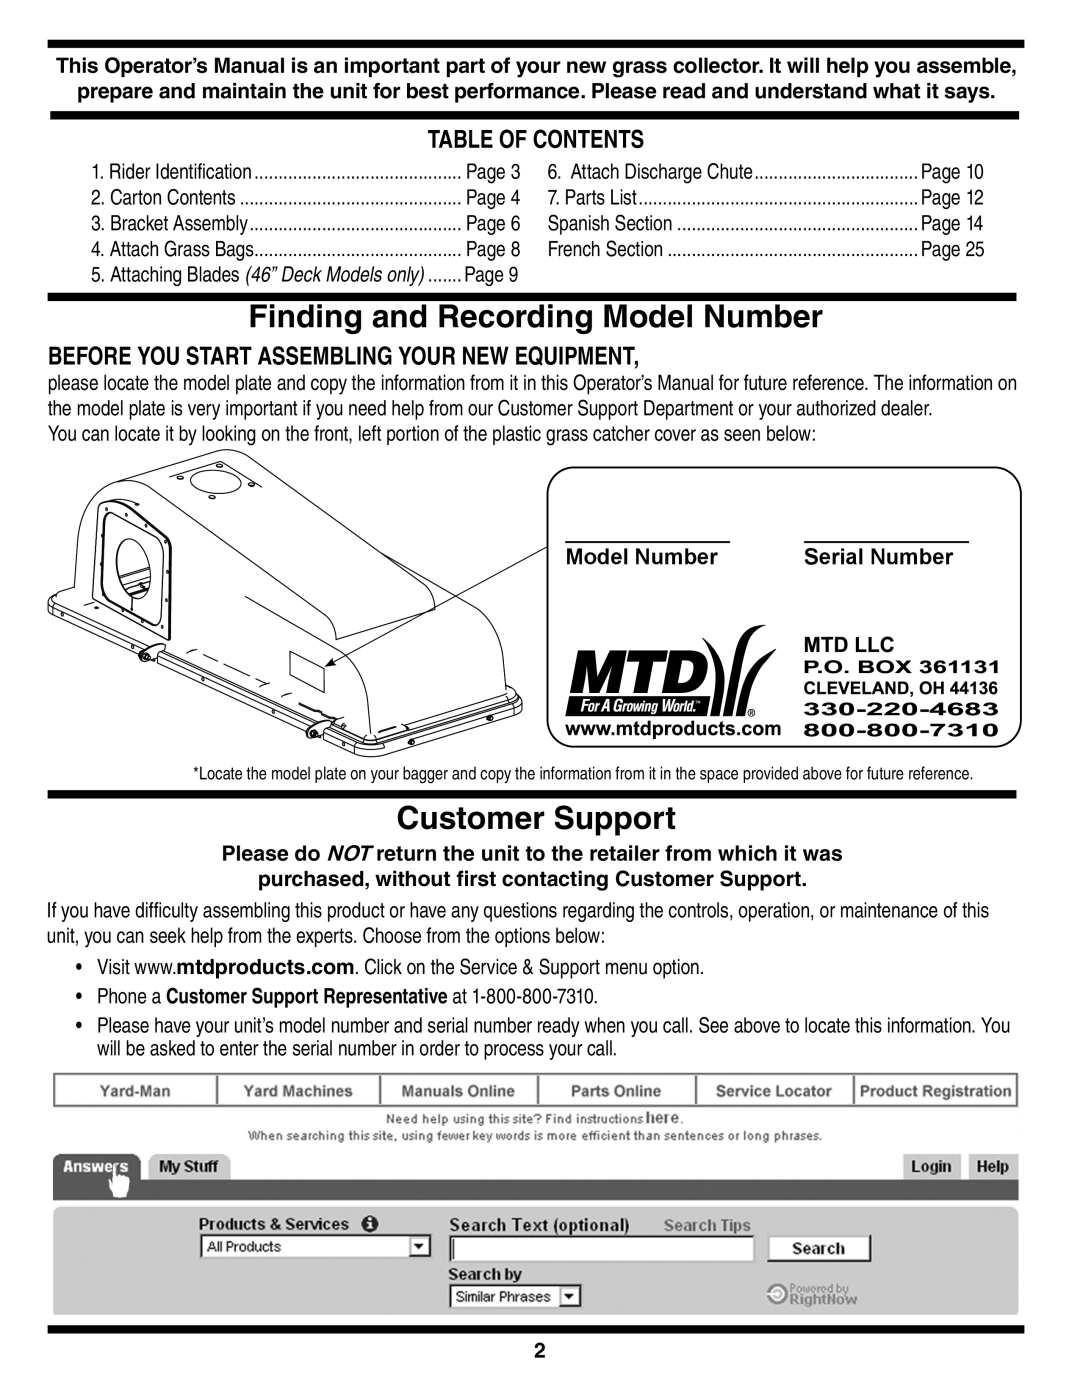 MTD 190-182,190-180 warranty Finding and Recording Model Number, Customer Support, Table Of Contents, Serial Number 